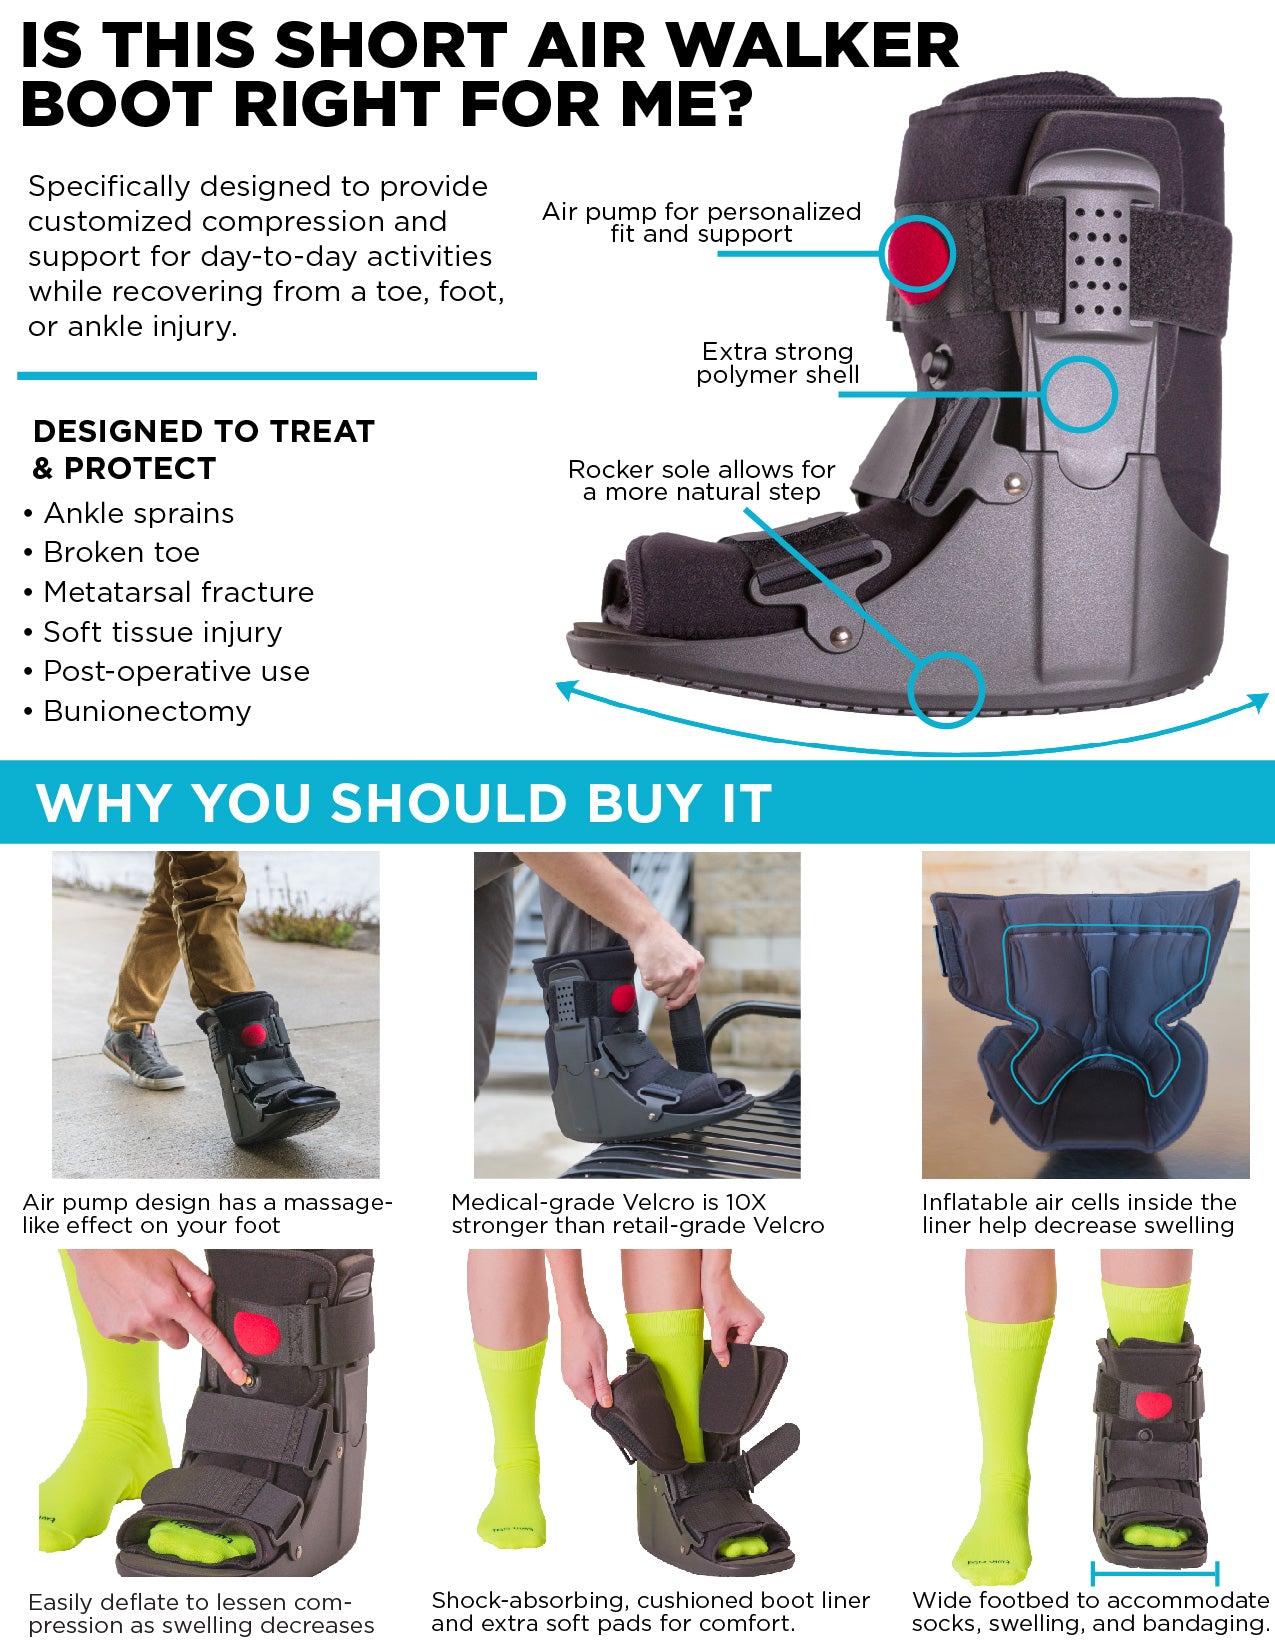 features that make this the best non-air walker boot